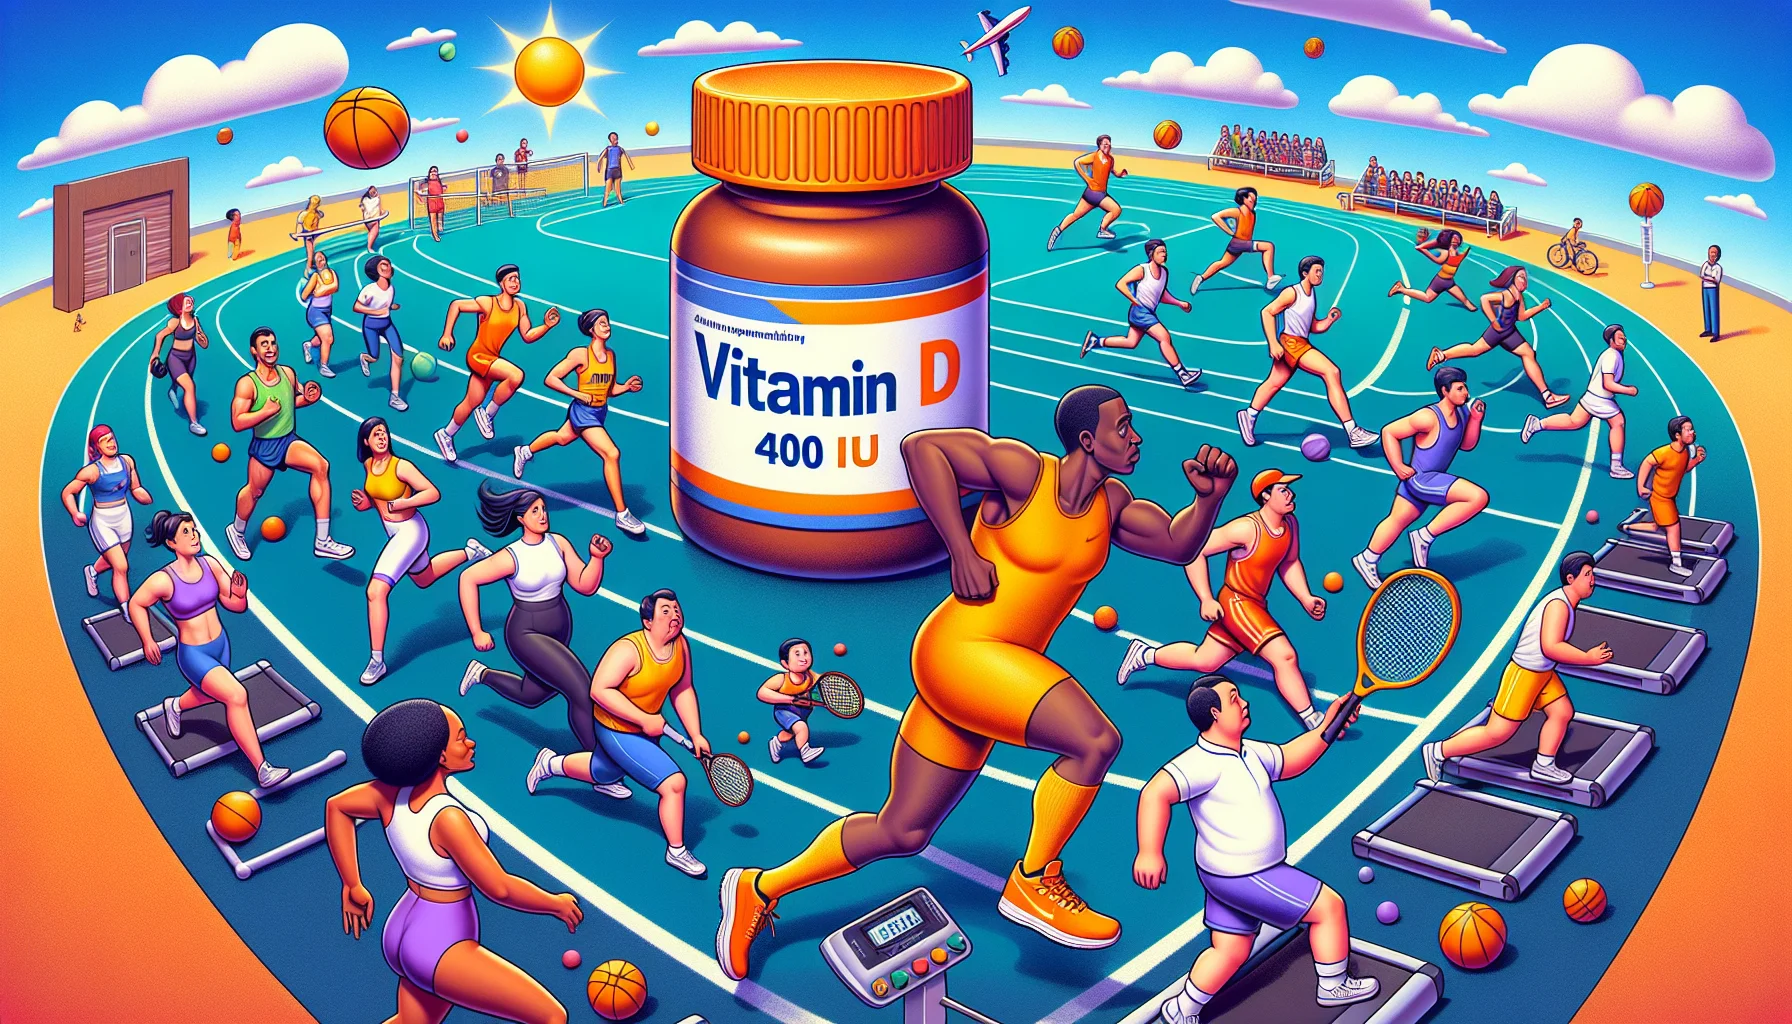 Create a vibrant and humorous sports scene with an oversized illustration of a Vitamin D supplement bottle labeled as '400 IU'. The sports scene should include a multitude of sports persons of different descents and genders. A Middle-Eastern female athlete might be running on a treadmill, a Caucasian male swimmer preparing to dive into the pool, a Black female tennis player swinging her racket, and a South Asian male football player preparing to kick a ball. The athletes are in awe of the giant vitamin bottle, their reactions exaggerating the importance of the supplement. Please make sure the overall ambiance is light-hearted and friendly, stimulating people to take supplements for sports.